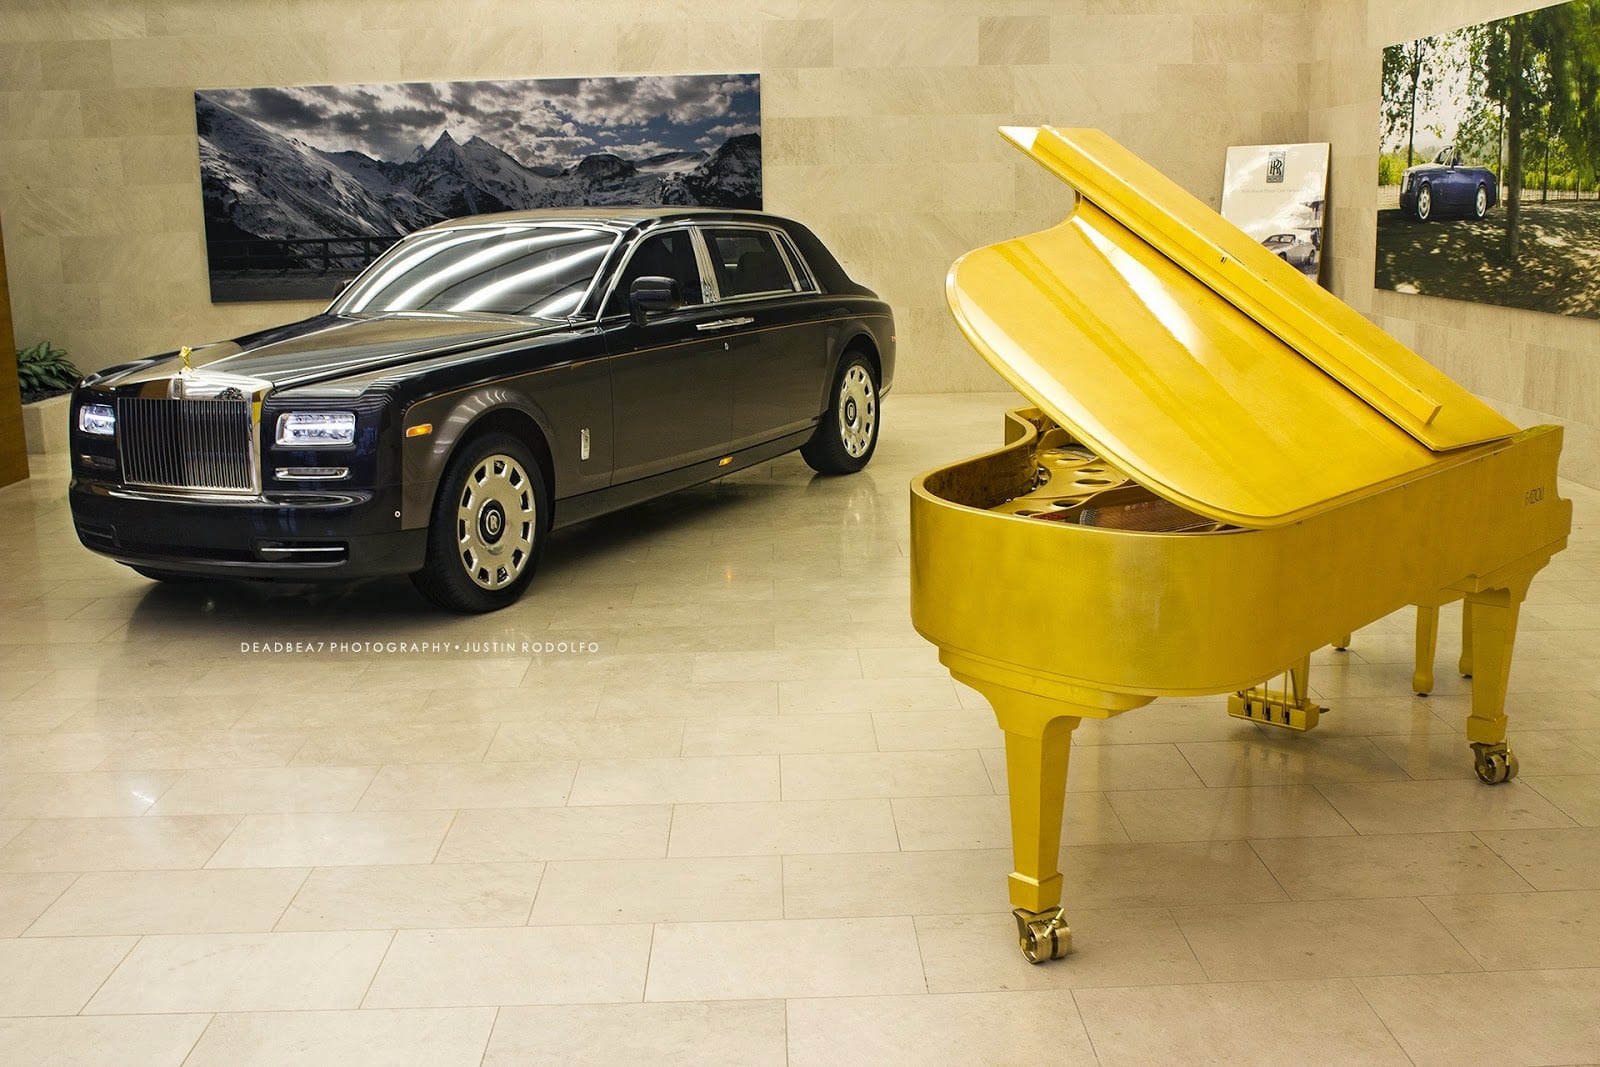 European Pianos in Vancouver  Most Expensive RollsRoyce to ever come to  Canada